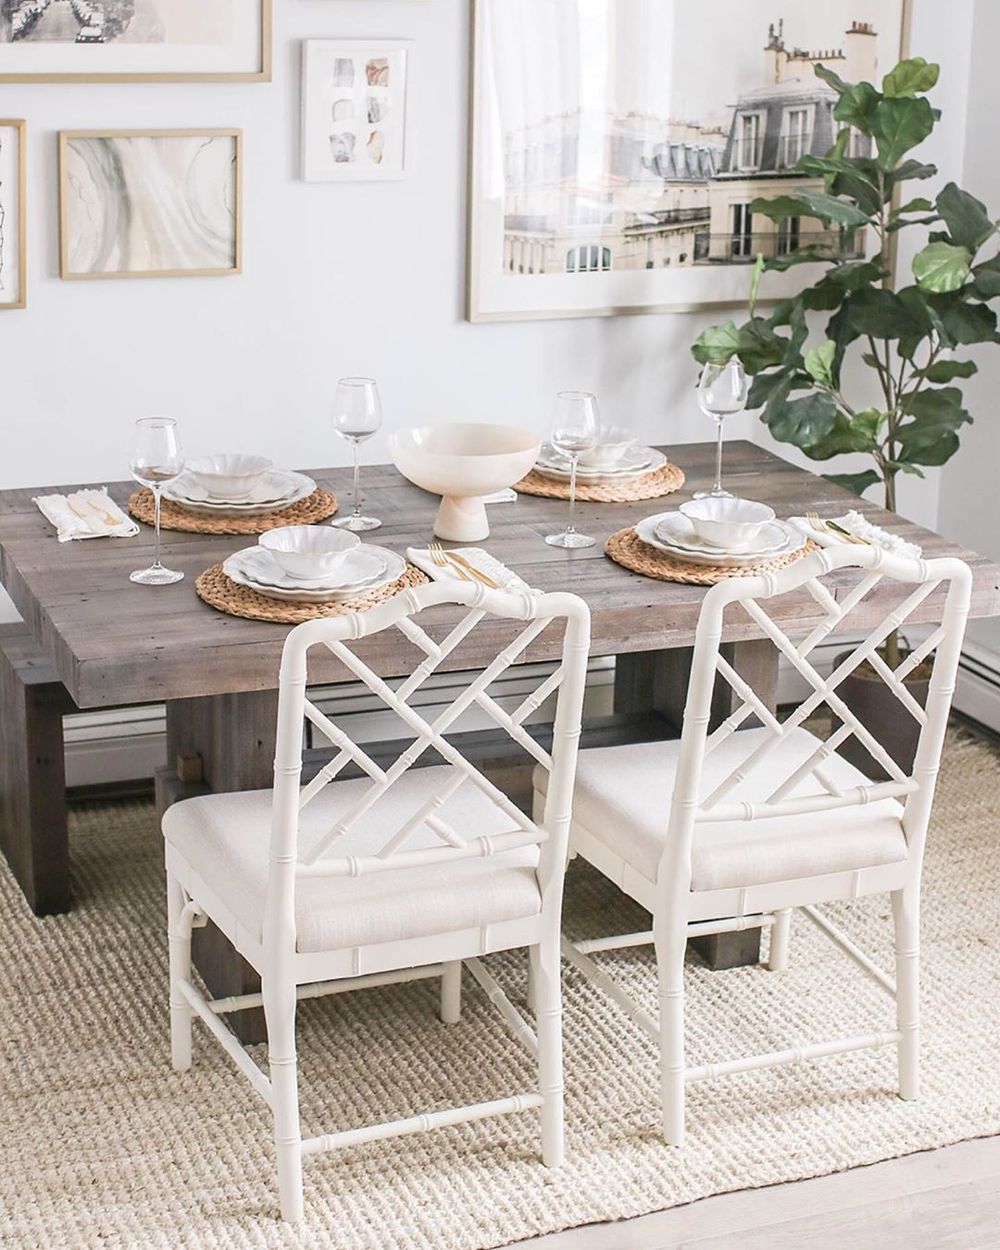 Neutral Dining Room with Jute rug and Green Indoor House Plant via @teresalaucar